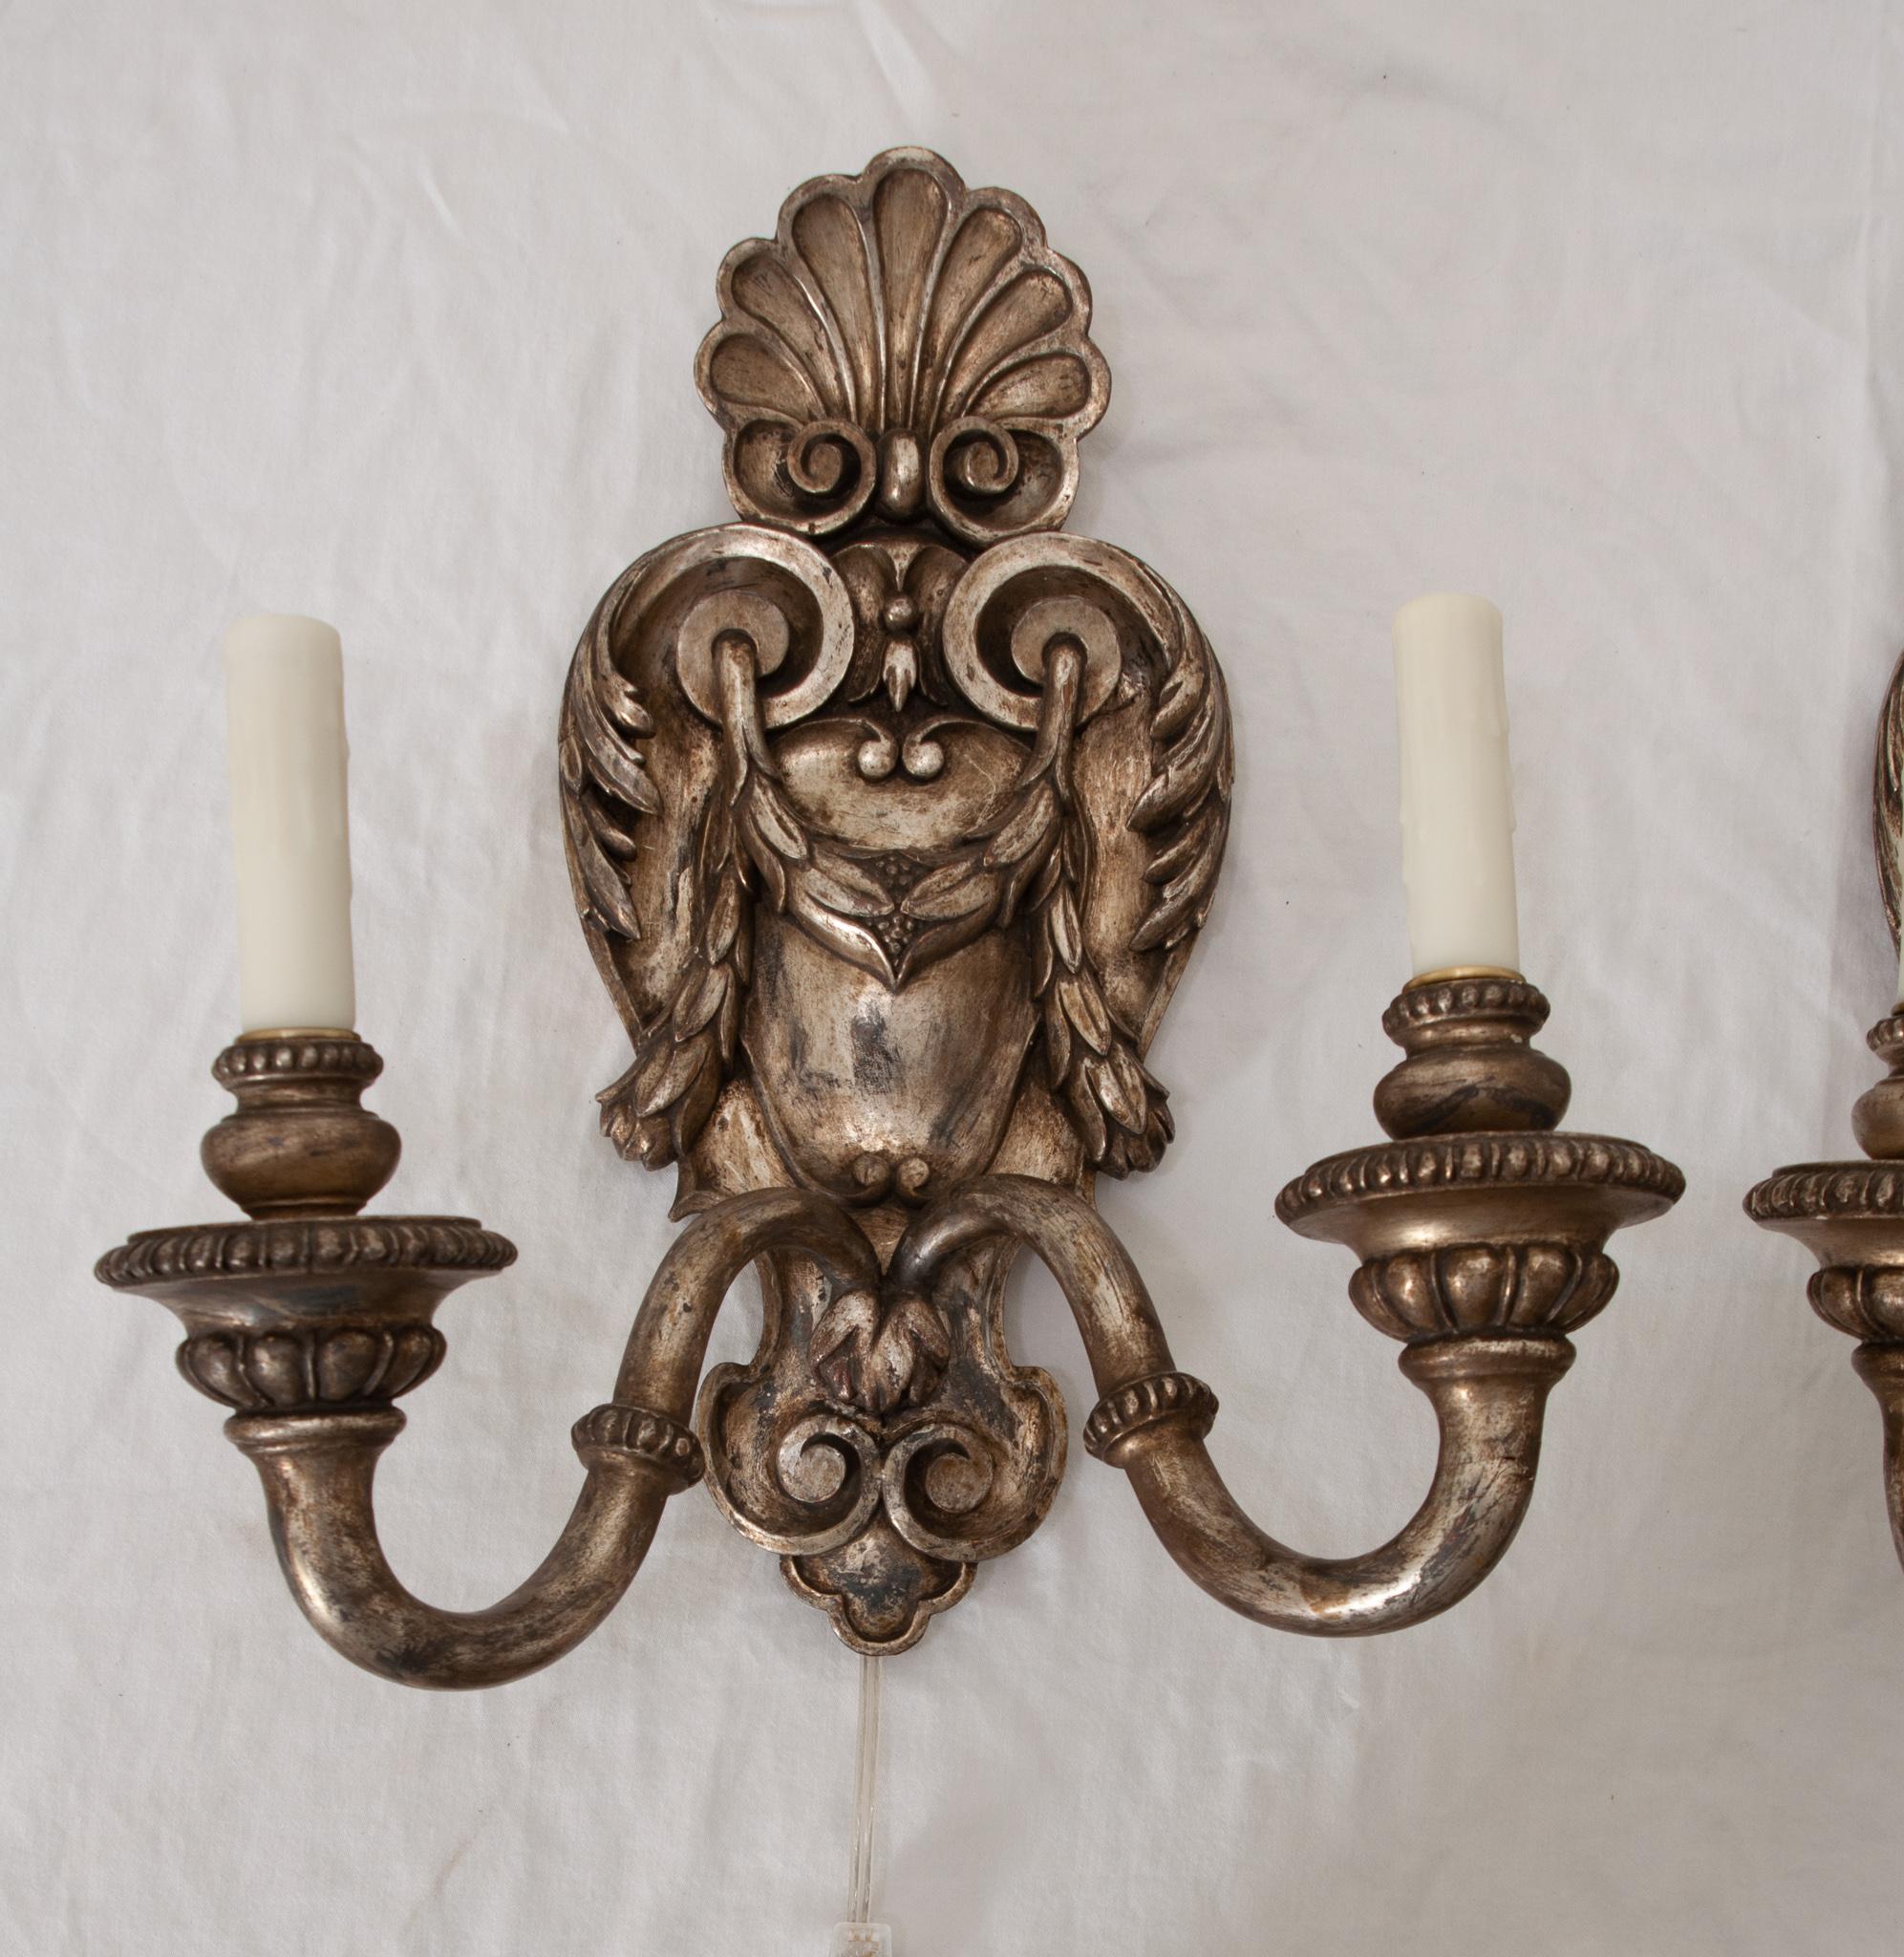 An elegant pair of silver gilt wall sconces hand-crafted in France in the 20th century. Each of these lustrous sconces features beautiful hand-carved shell motifs at the pediment, scrolling motifs, acanthus leaves embellishment, and bellflowers